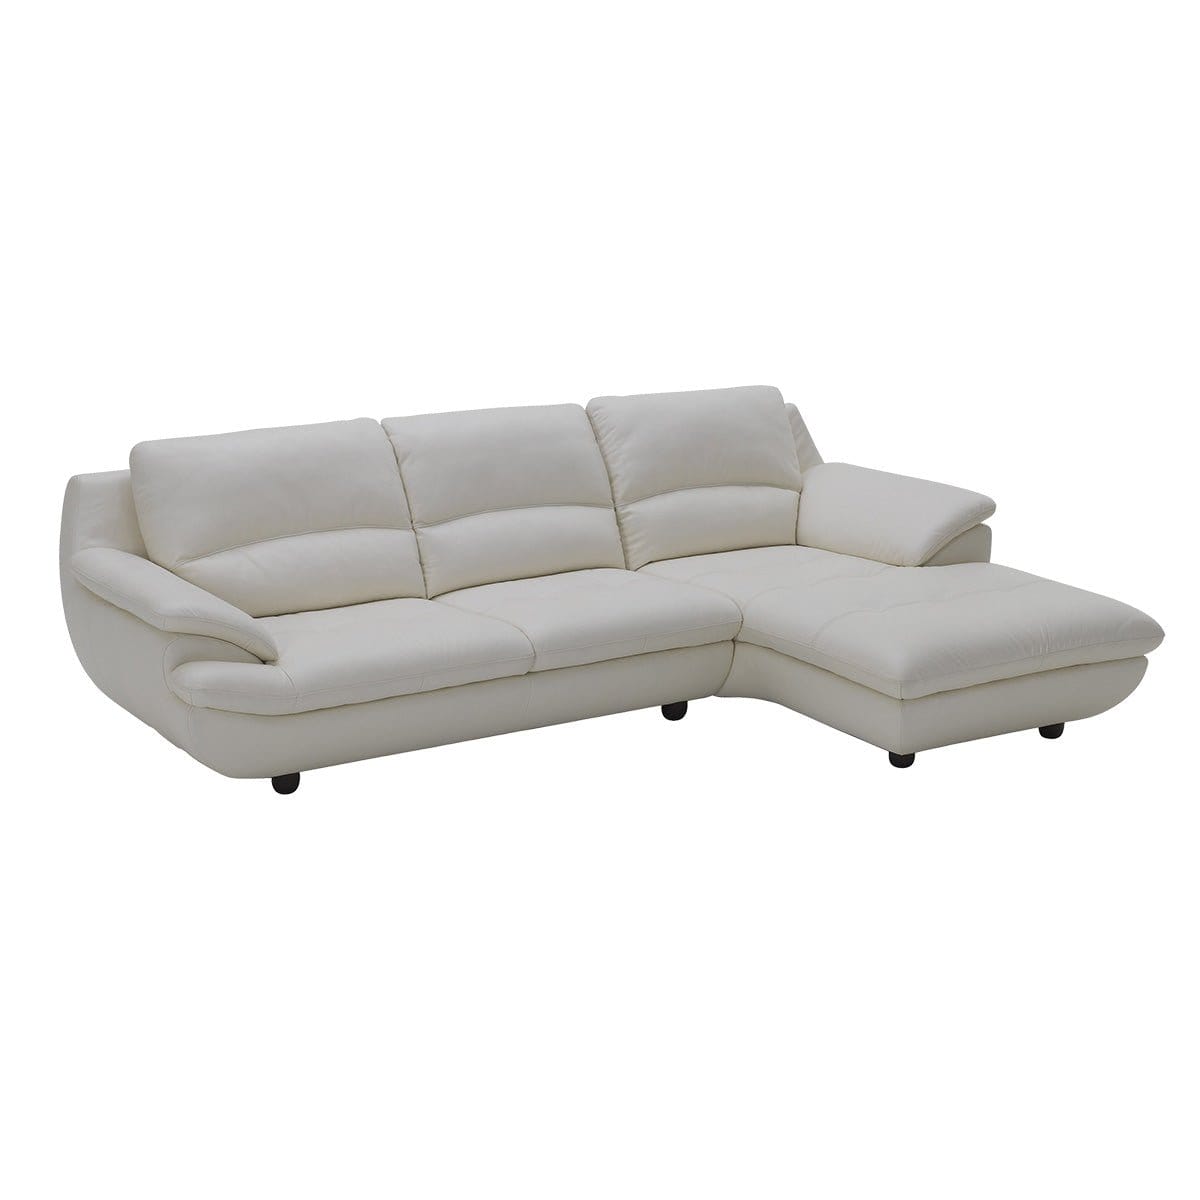 #1 KUKA #1235 L-Shaped Leather Sofa (Color: M2936-K) picket and rail